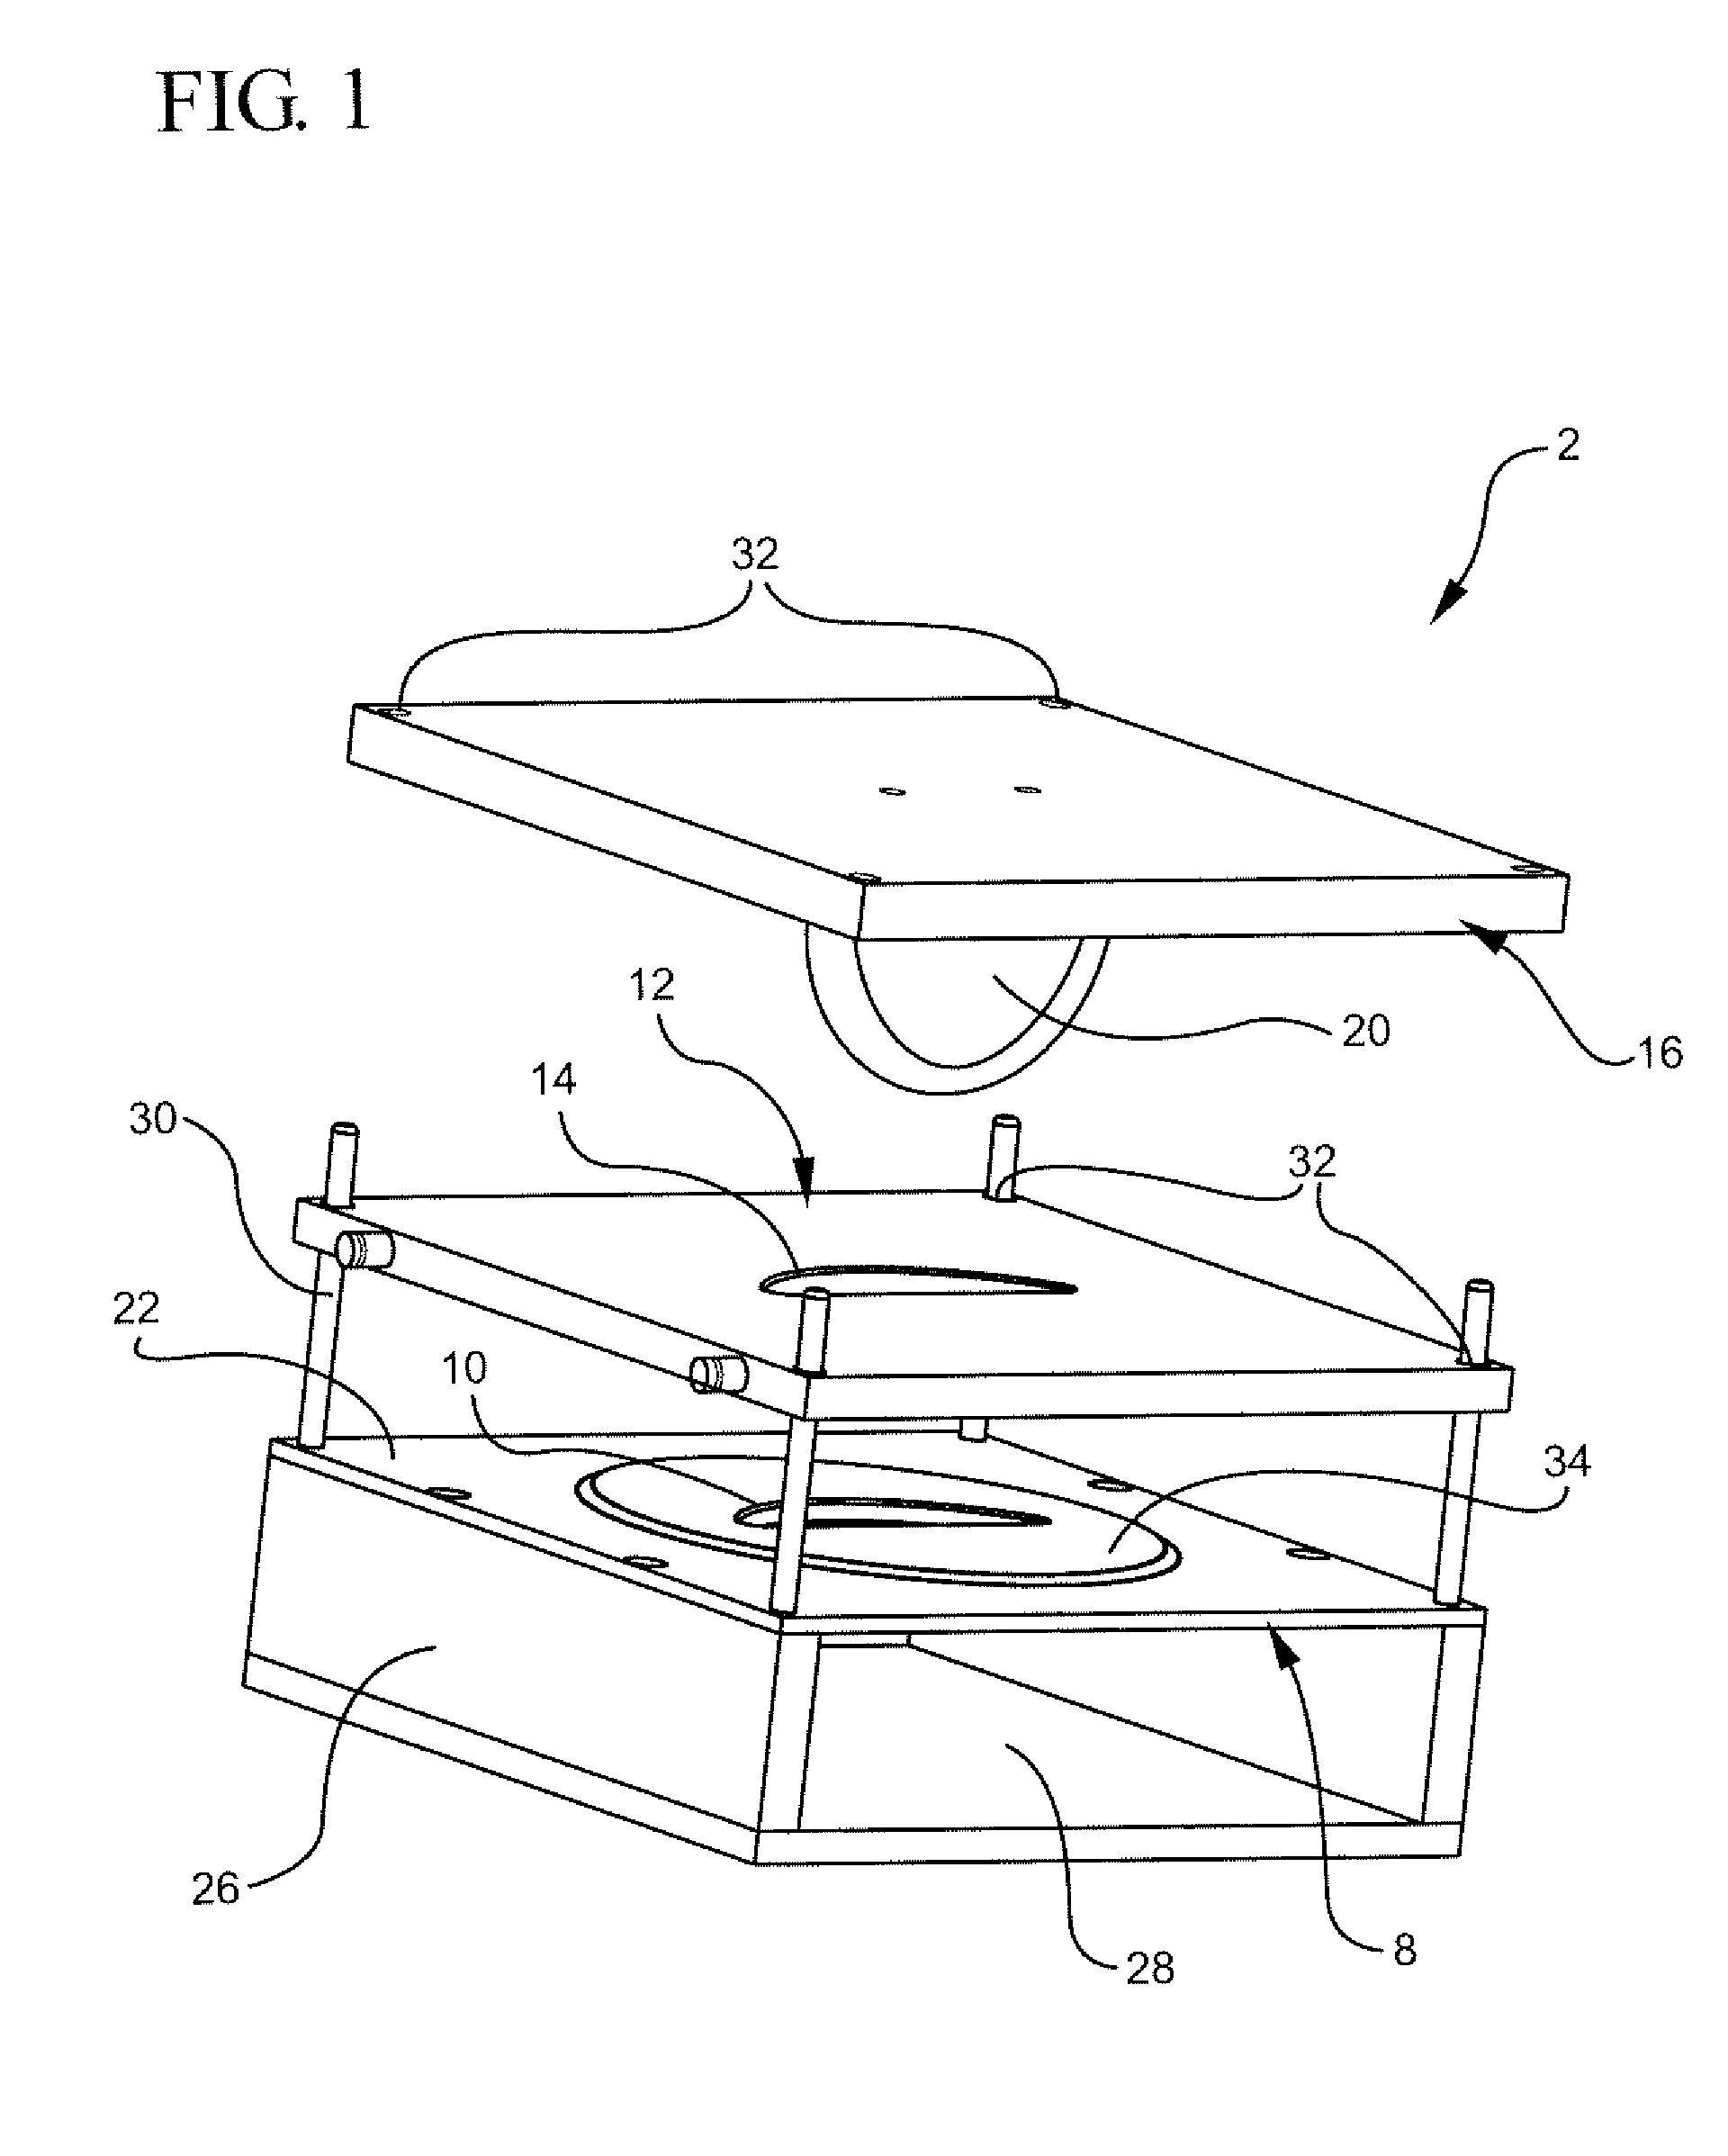 Preformed support device and method and apparatus for manufacturing the same